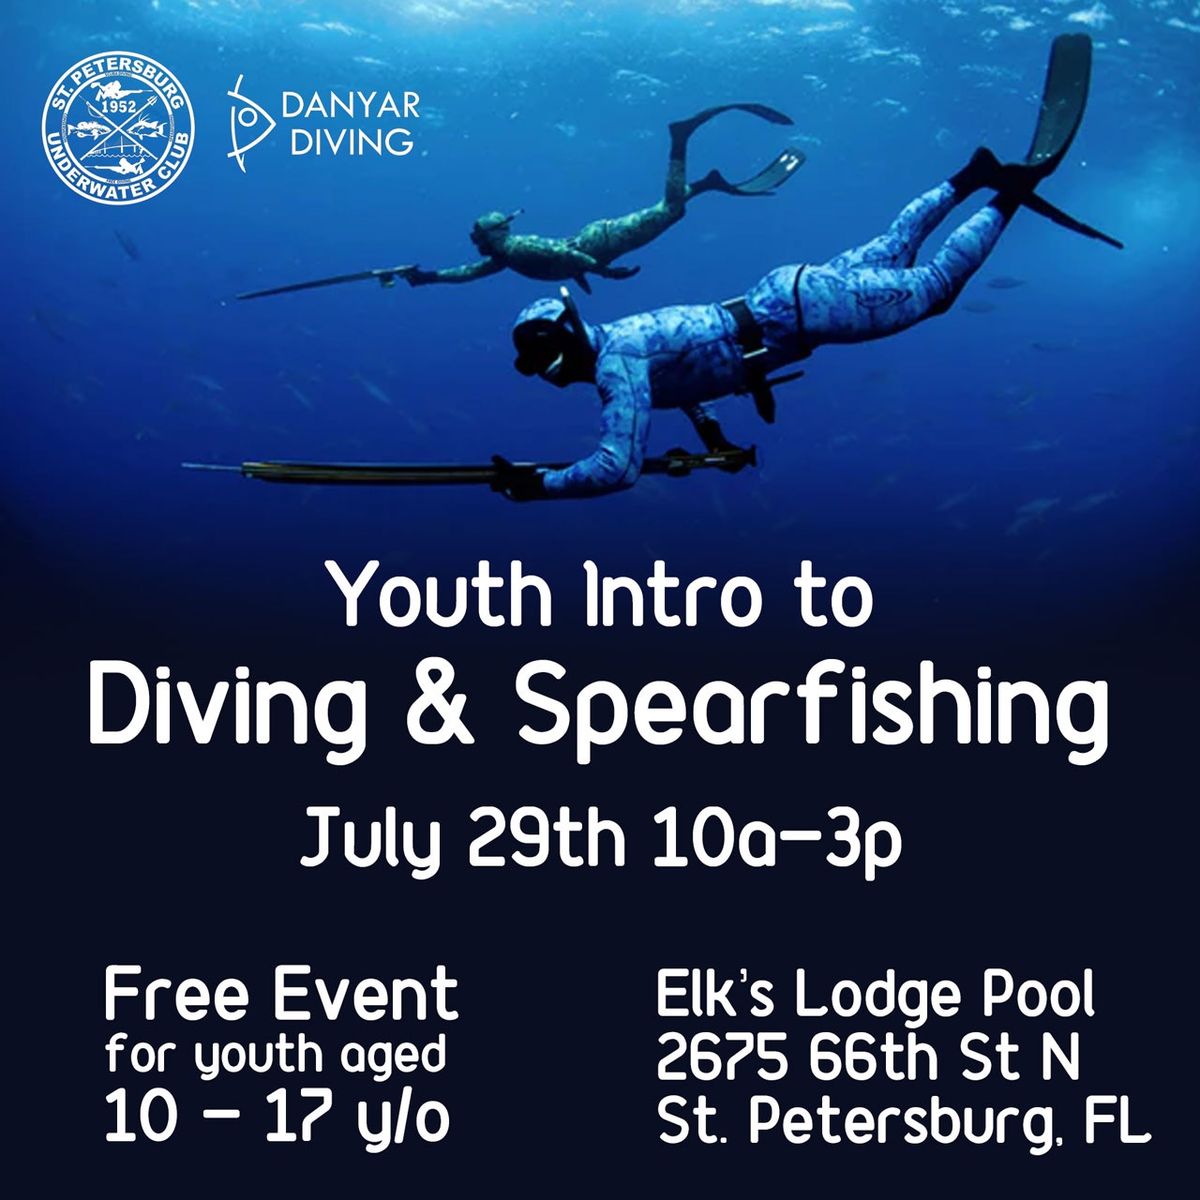 Youth intro to Diving & Spearfishing